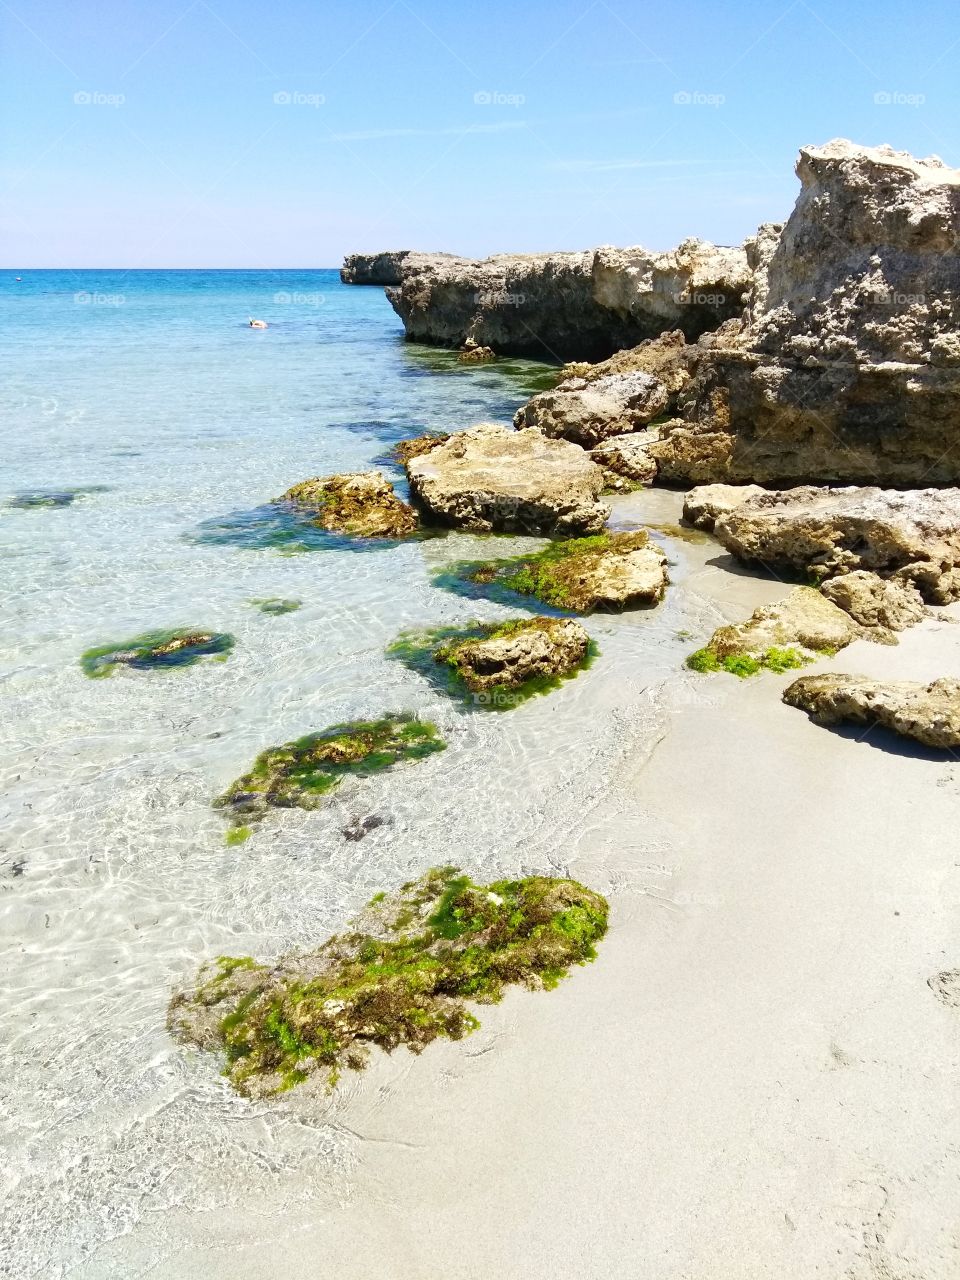 Sea view with rocks in the water on the beach of San Foca, Salento, Lecce, Puglia, Italy